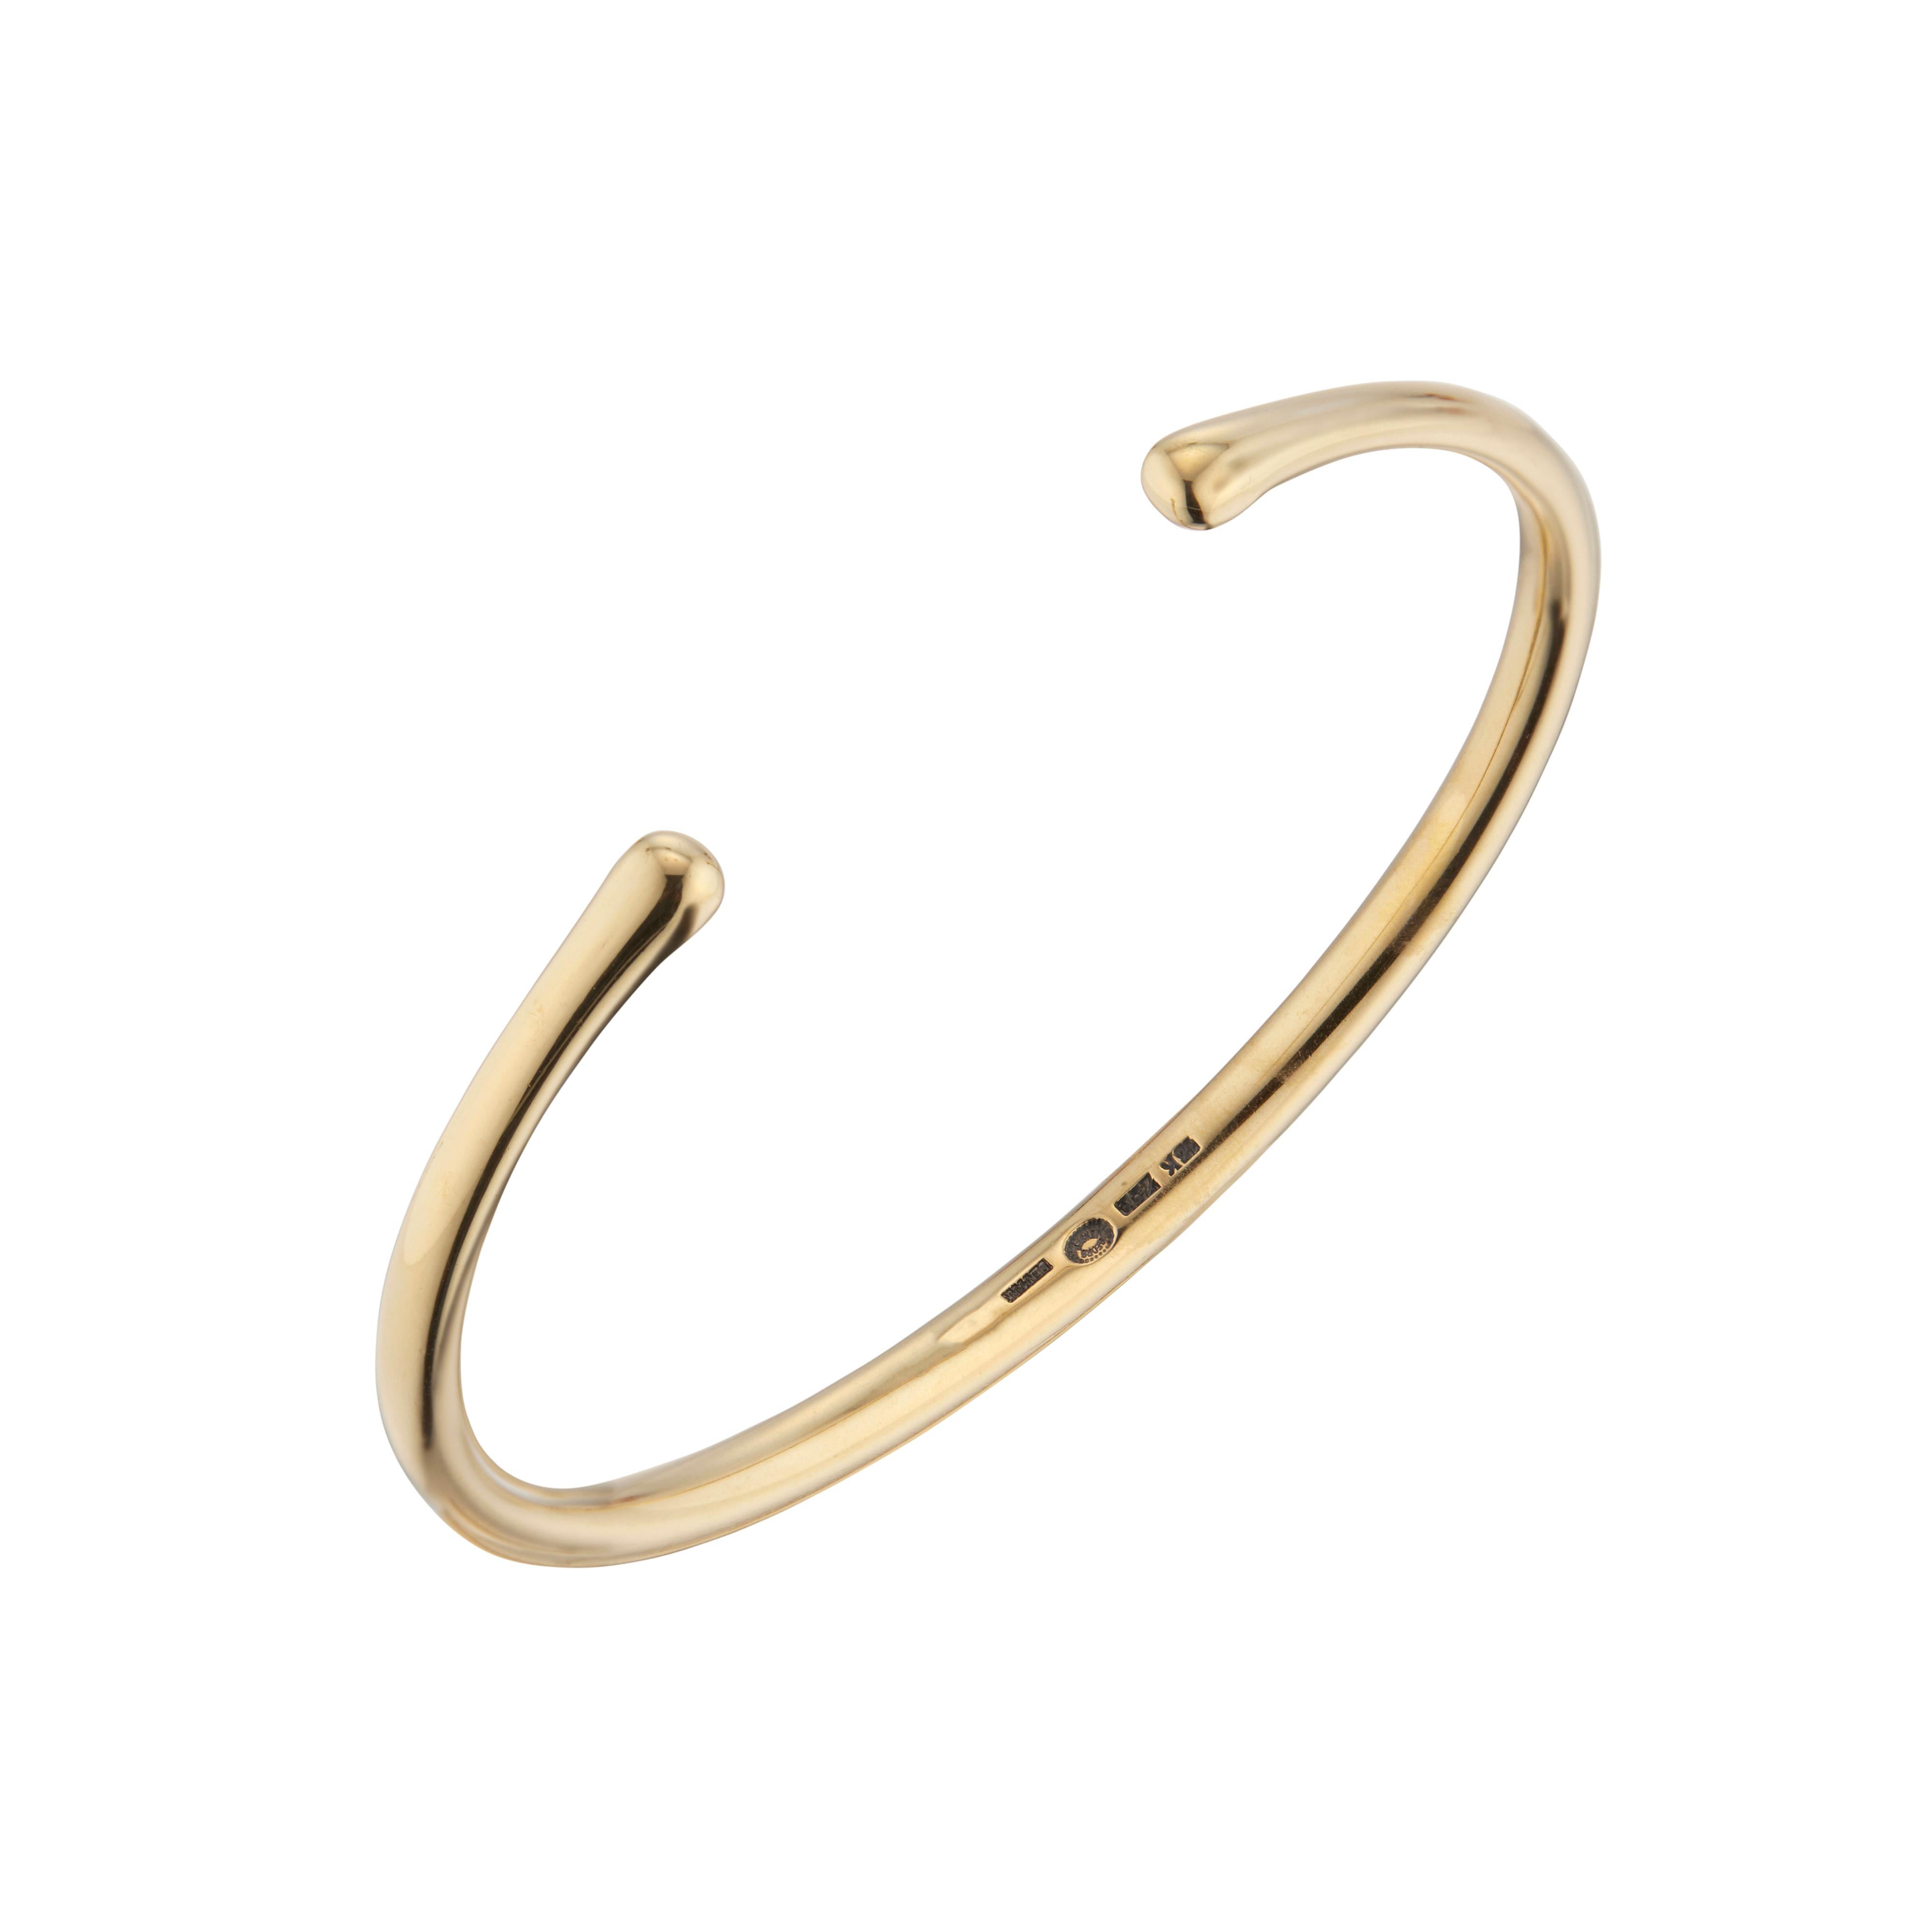 Georg Jensen 18k yellow gold cuff style bracelet that tapers from center to ends.

18k yellow gold 
Stamped: 18k 750
Hallmark: Georg Jensen
29.2 grams
Width: 4.3mm at top
Inside dimensions: 2.45 Inches x 2.1 Inches
Thickness/depth: 4.1mm
Shape: Oval